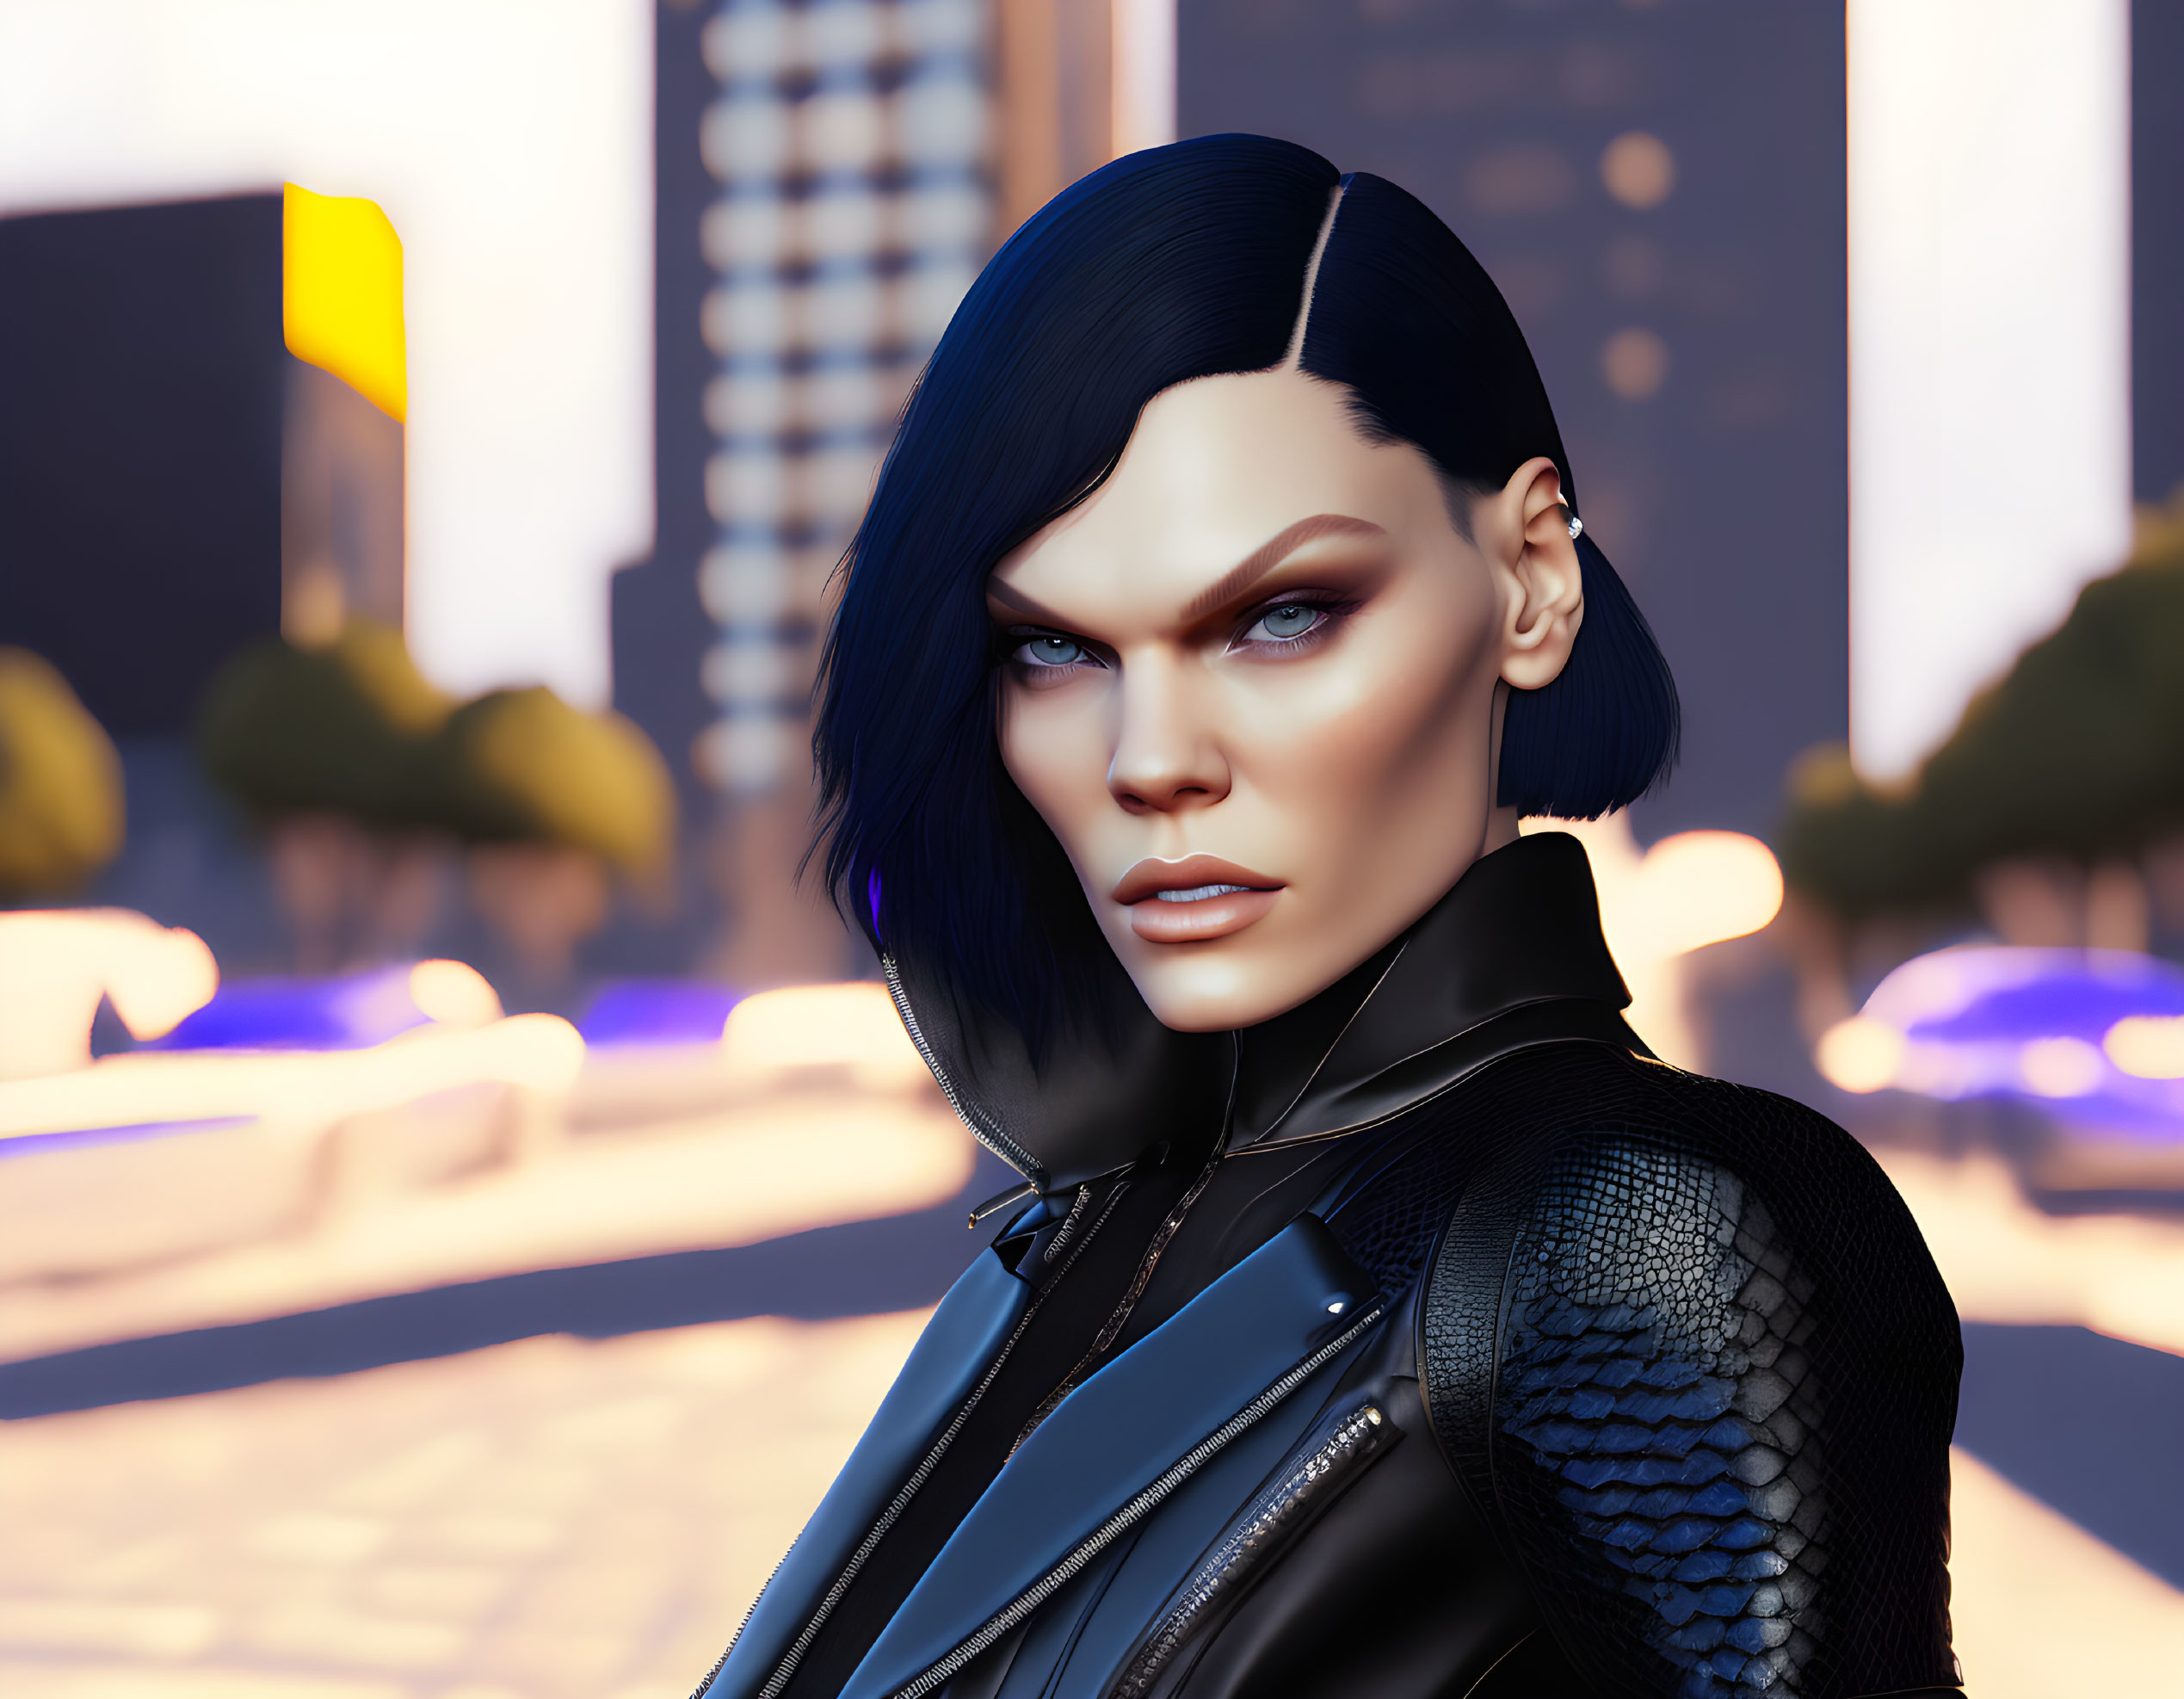 Detailed 3D illustration of woman with sharp features and blue eyes in black leather outfit